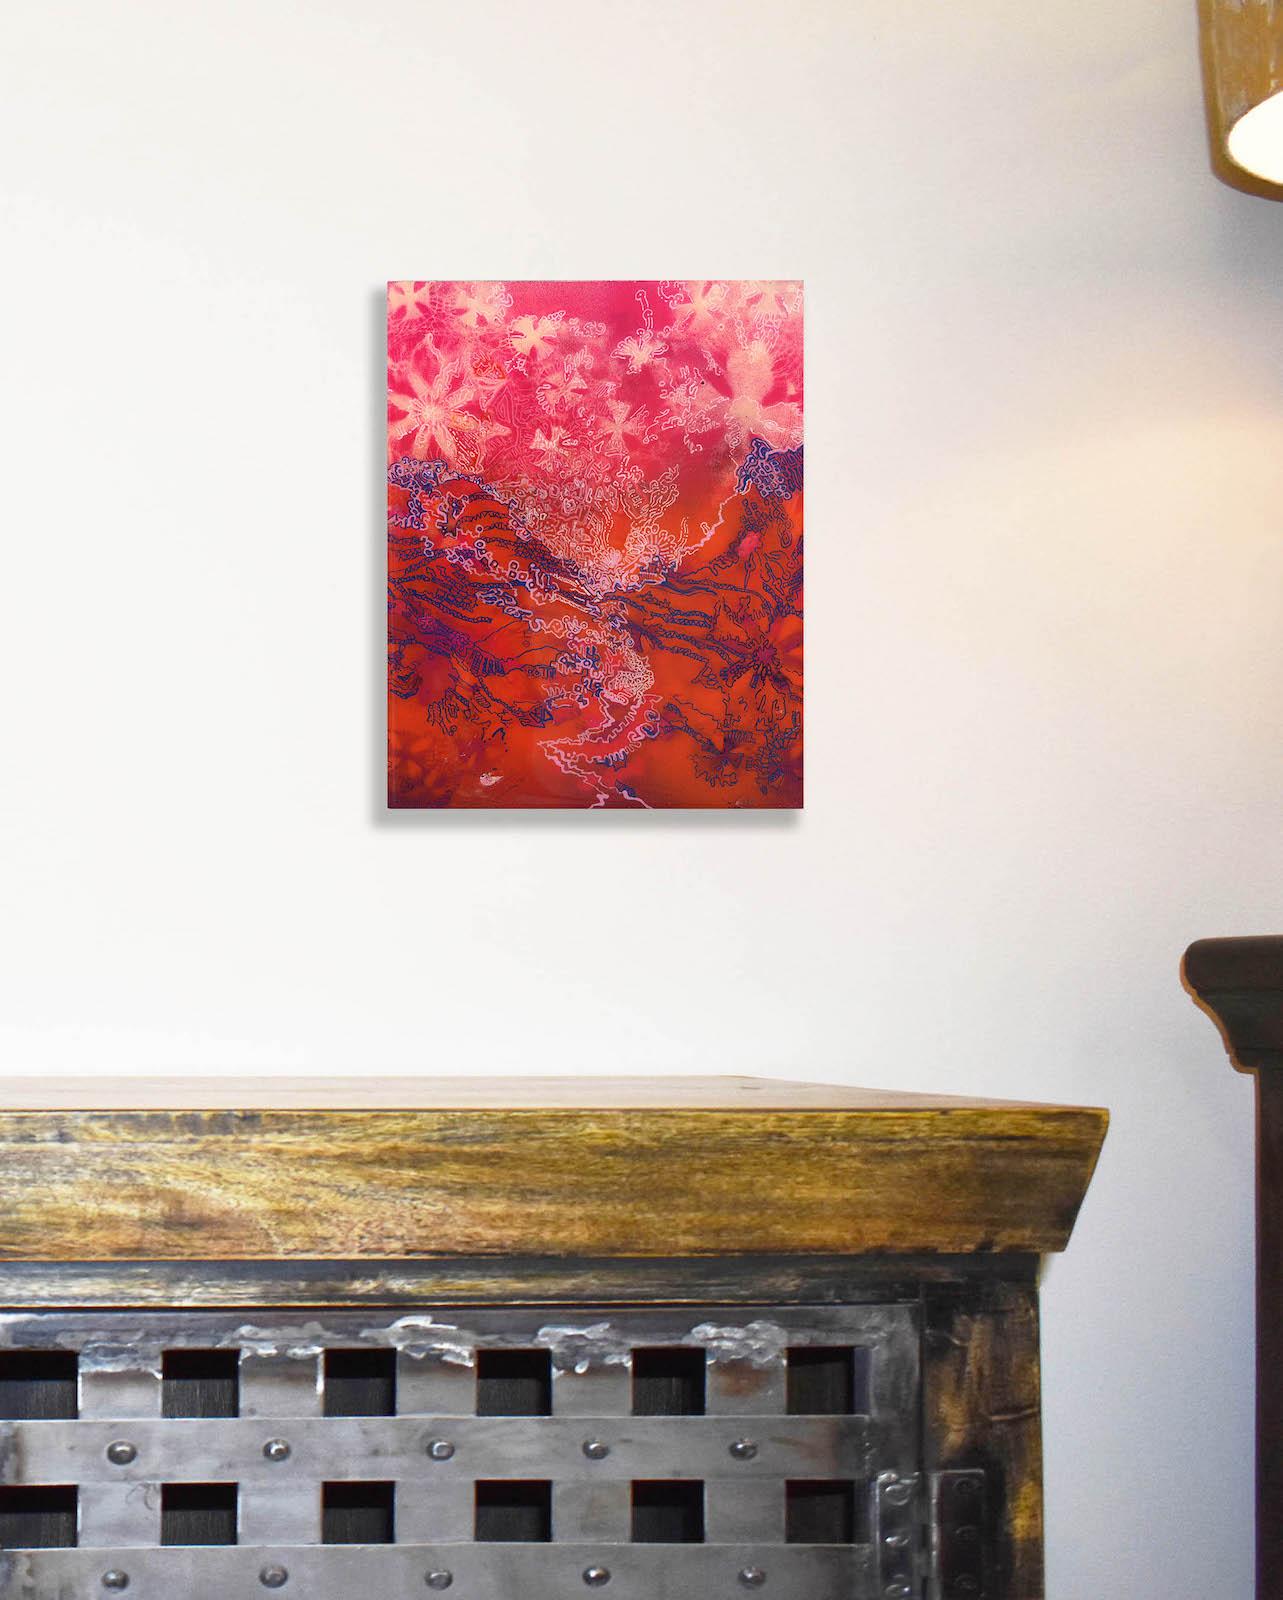 Valley Sunset densely textured linear designs and floral motifs fill a crowded pink and red space. Darlington explores themes of belonging, culture, identity, decoration, and the multiple connections that form a personal landscape. Layered